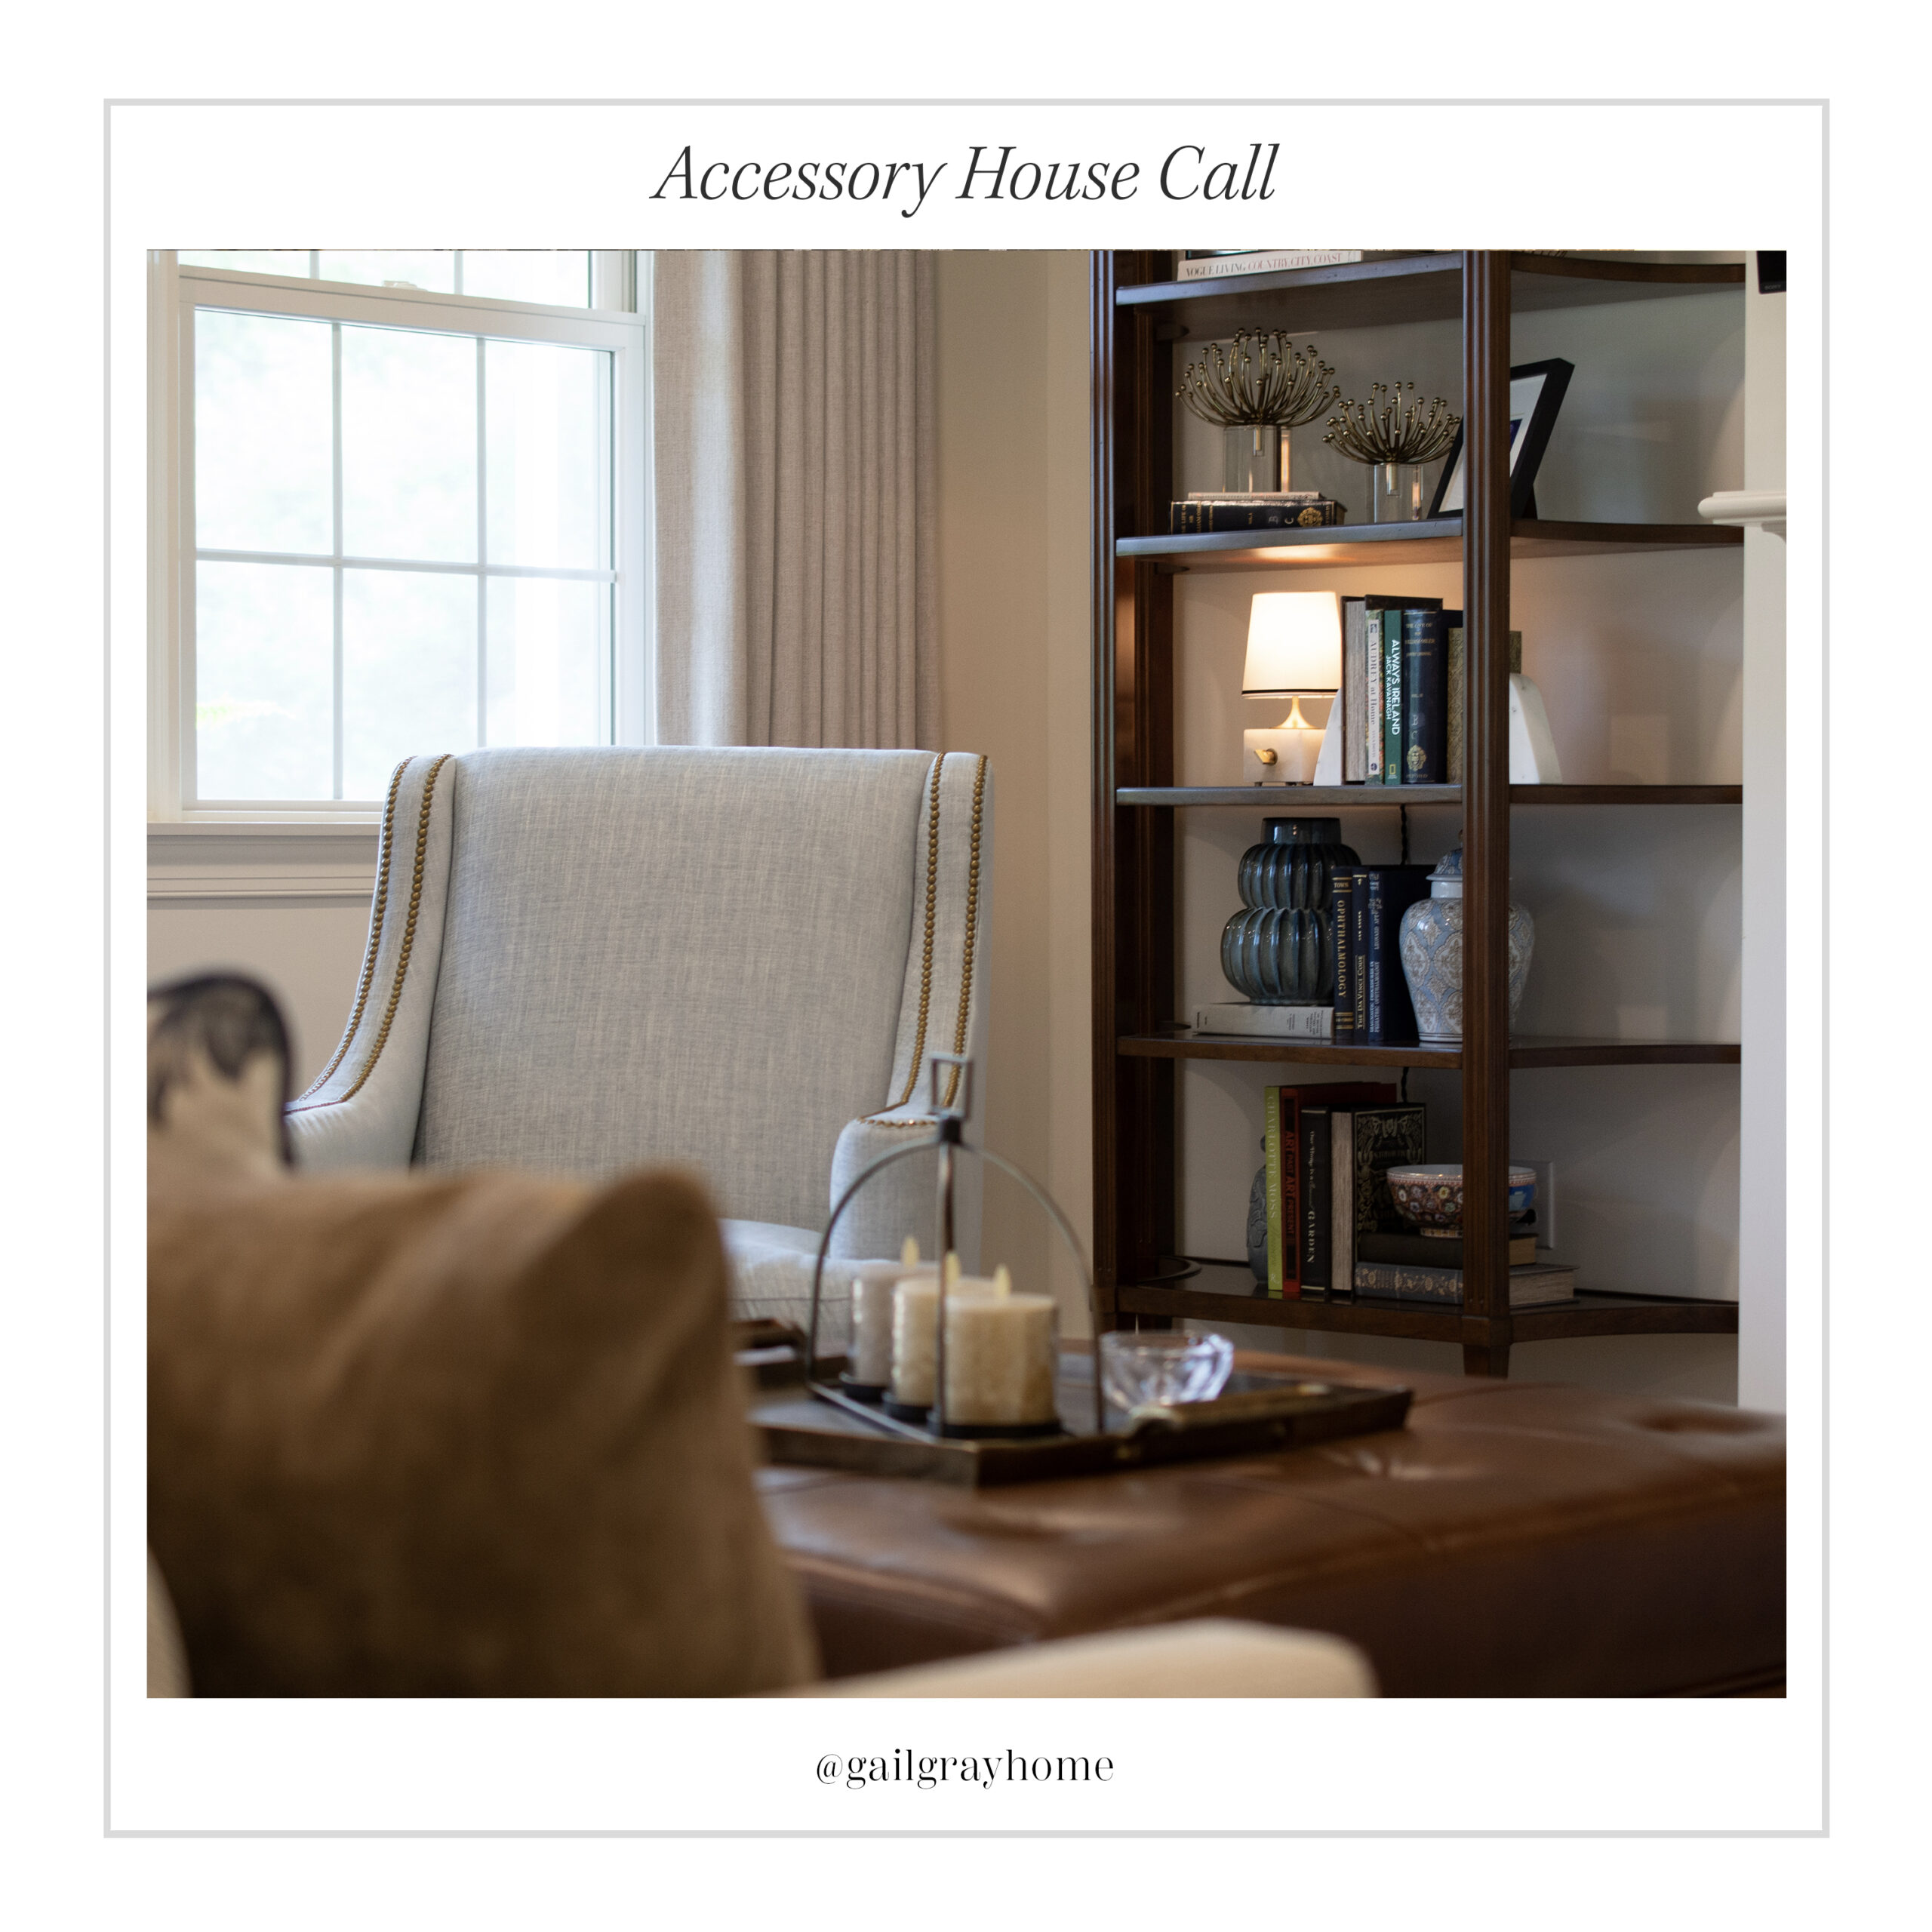 Accessory Design Services at GailGray Home